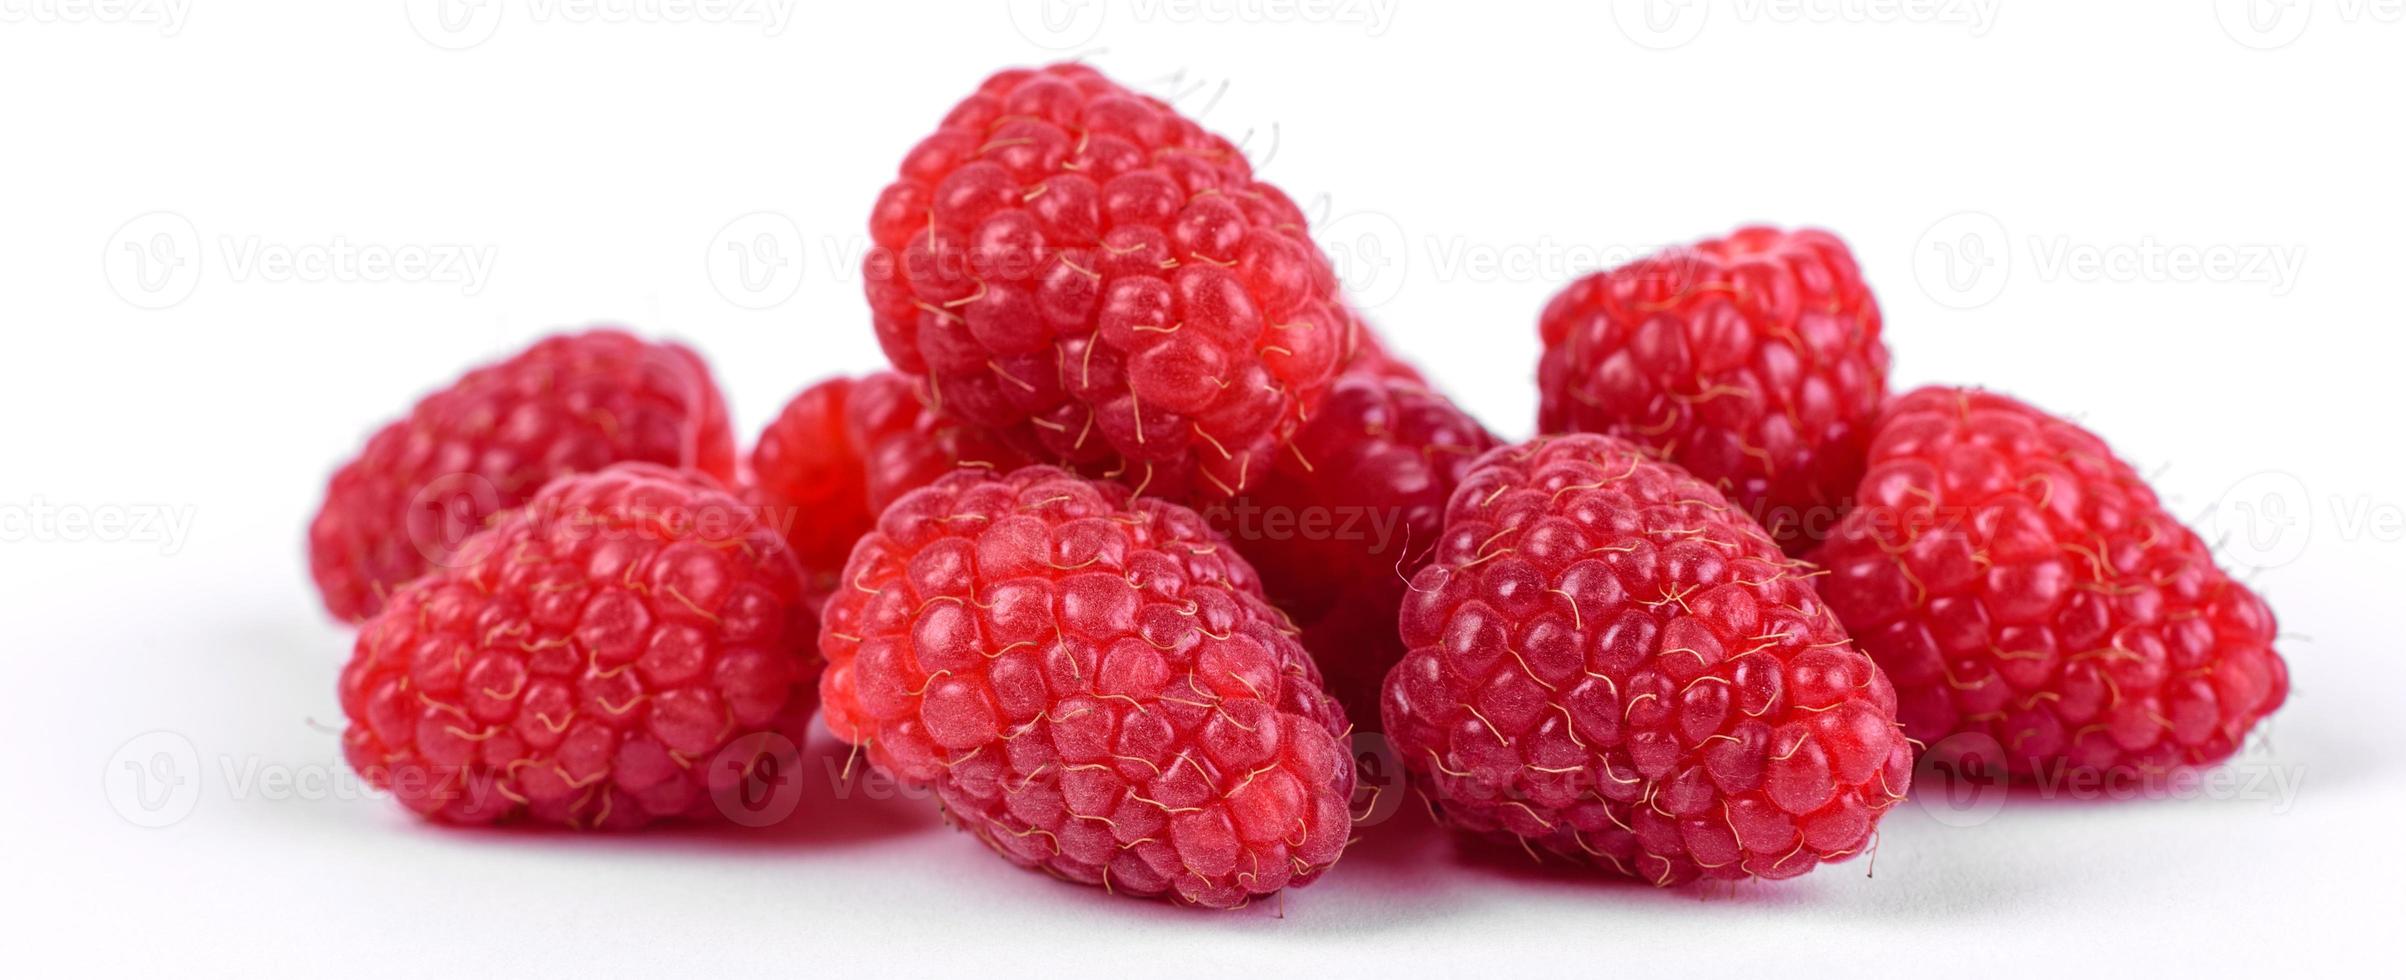 Ripe raspberries with raspberry leaf isolated on a white background photo